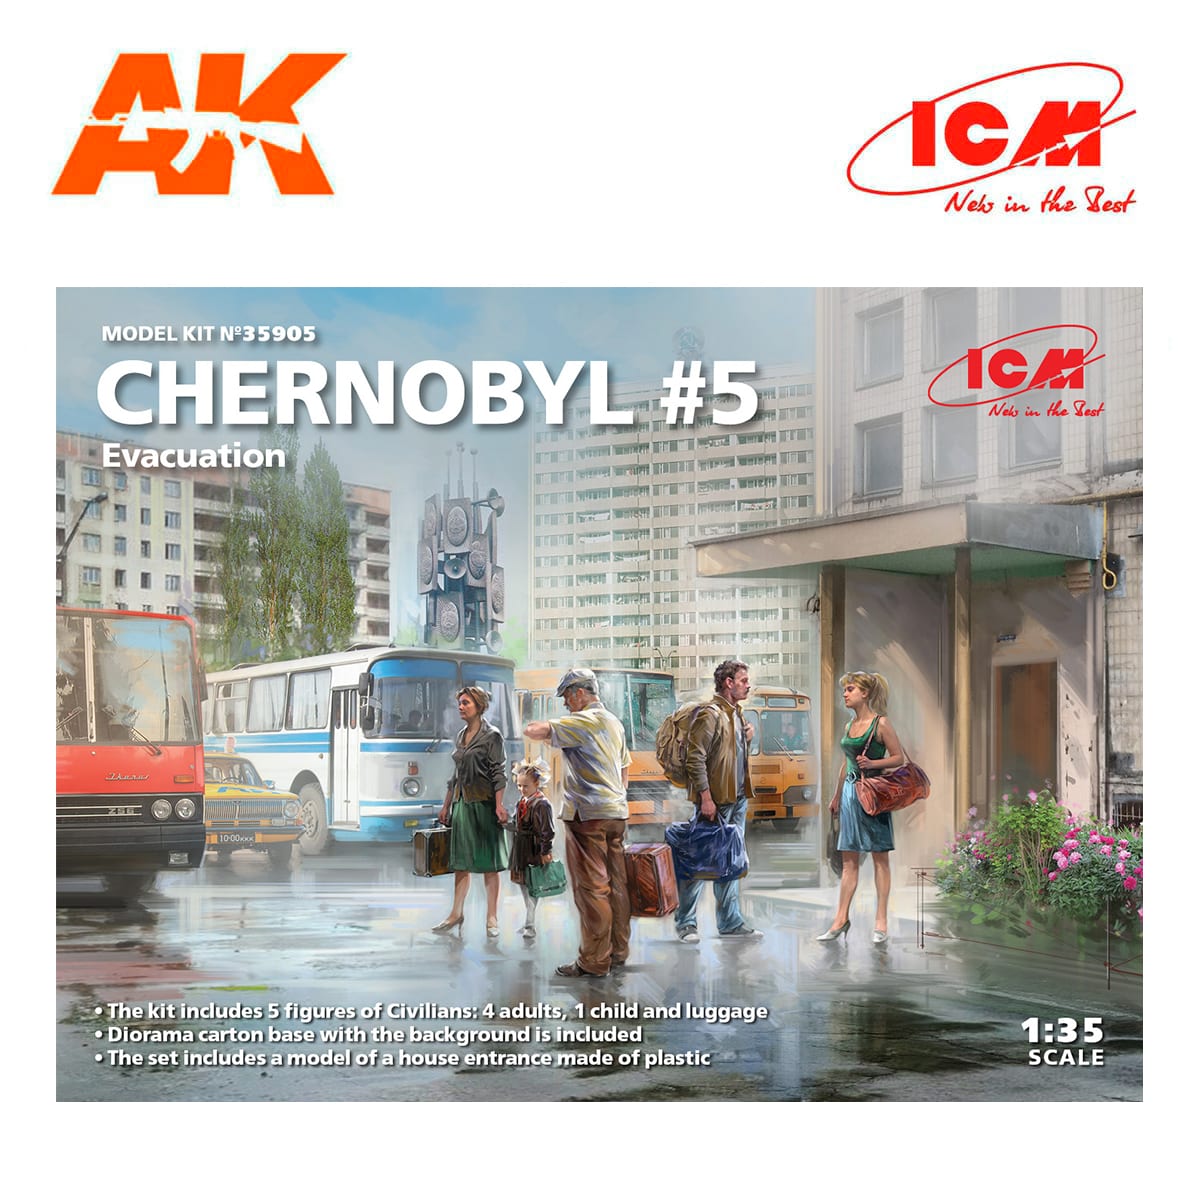 Chernobyl#5. Evacuation (4 adults, 1 child and luggage) (100% new molds) 1/35